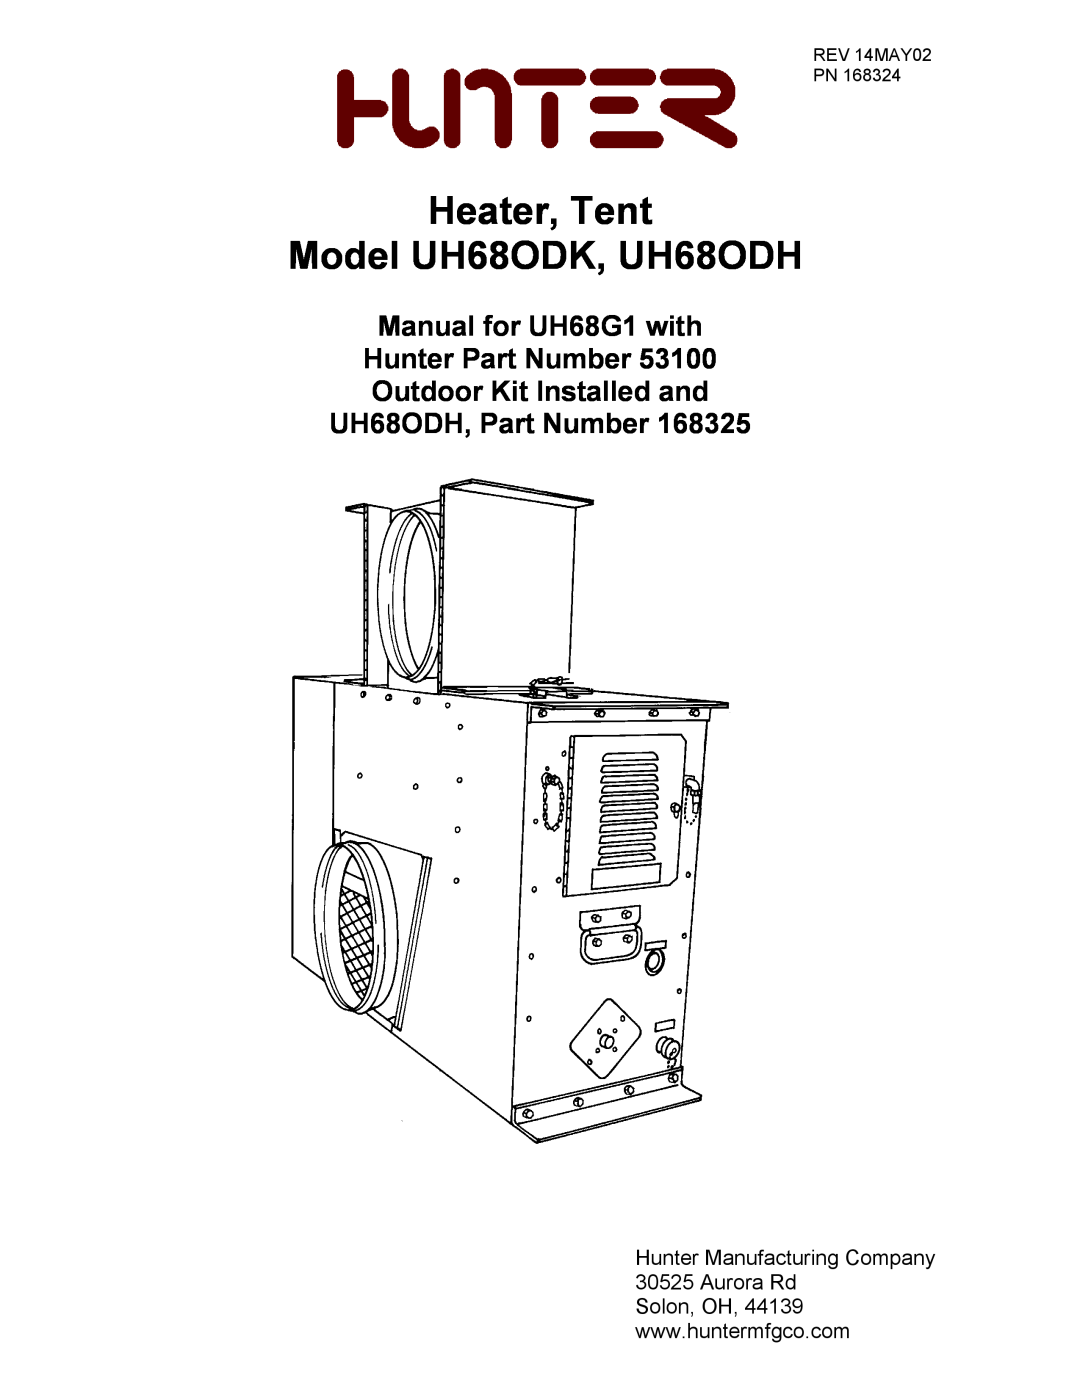 Hunter Fan manual Heater, Tent Model UH68ODK, UH68ODH, Manual for UH68G1 with Hunter Part Number, REV 14MAY02 PN 